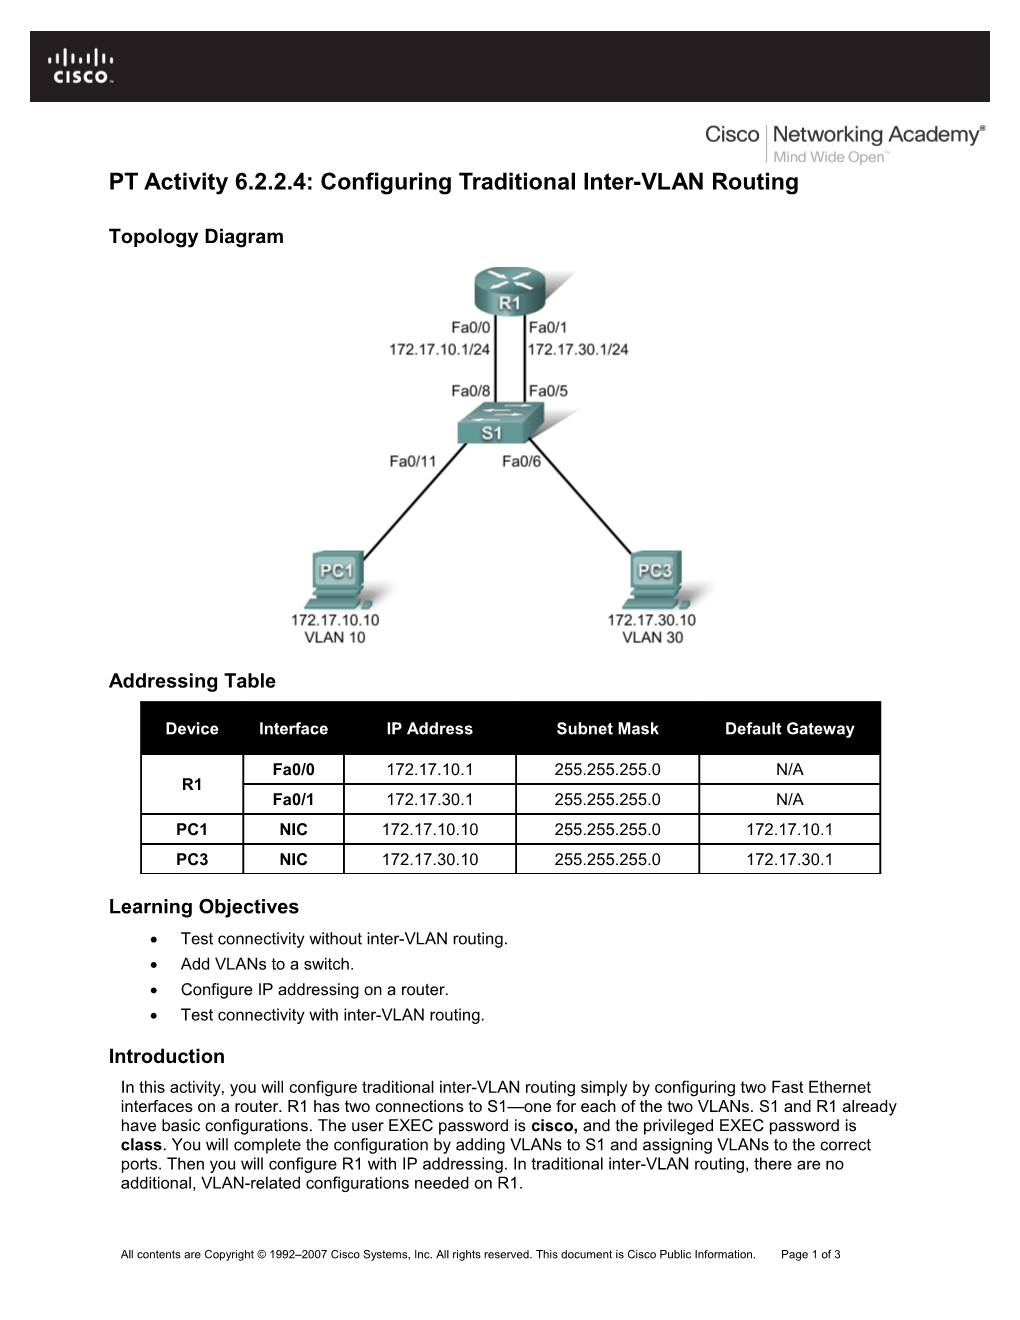 PT Activity 6.2.2.4: Configuring Traditional Inter-VLAN Routing